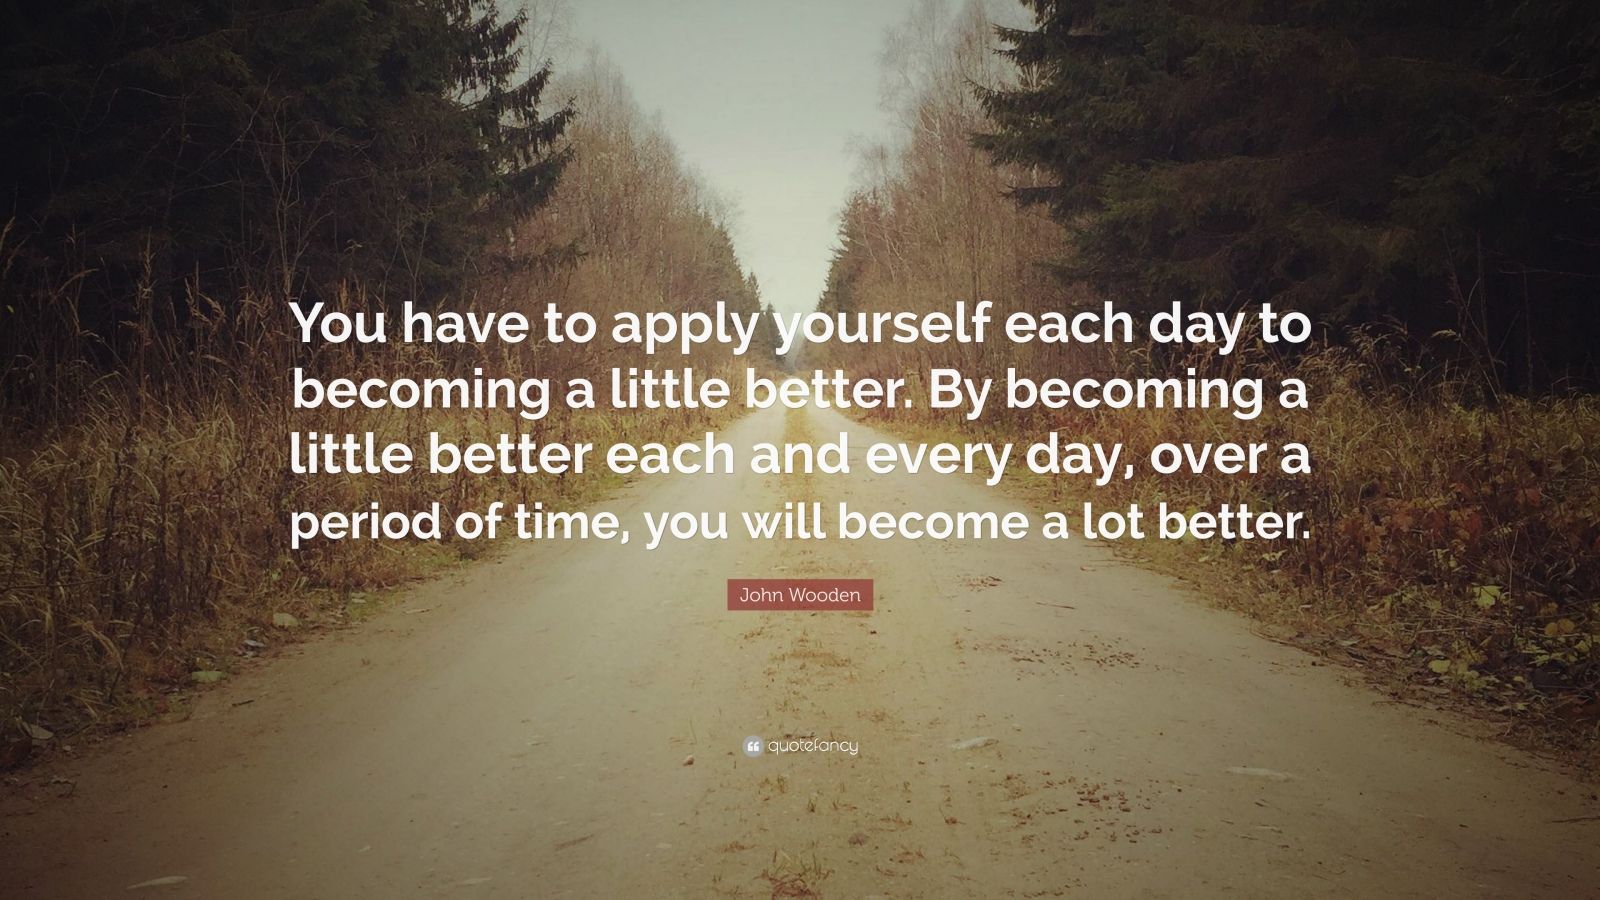 406754 John Wooden Quote You have to apply yourself each day to becoming